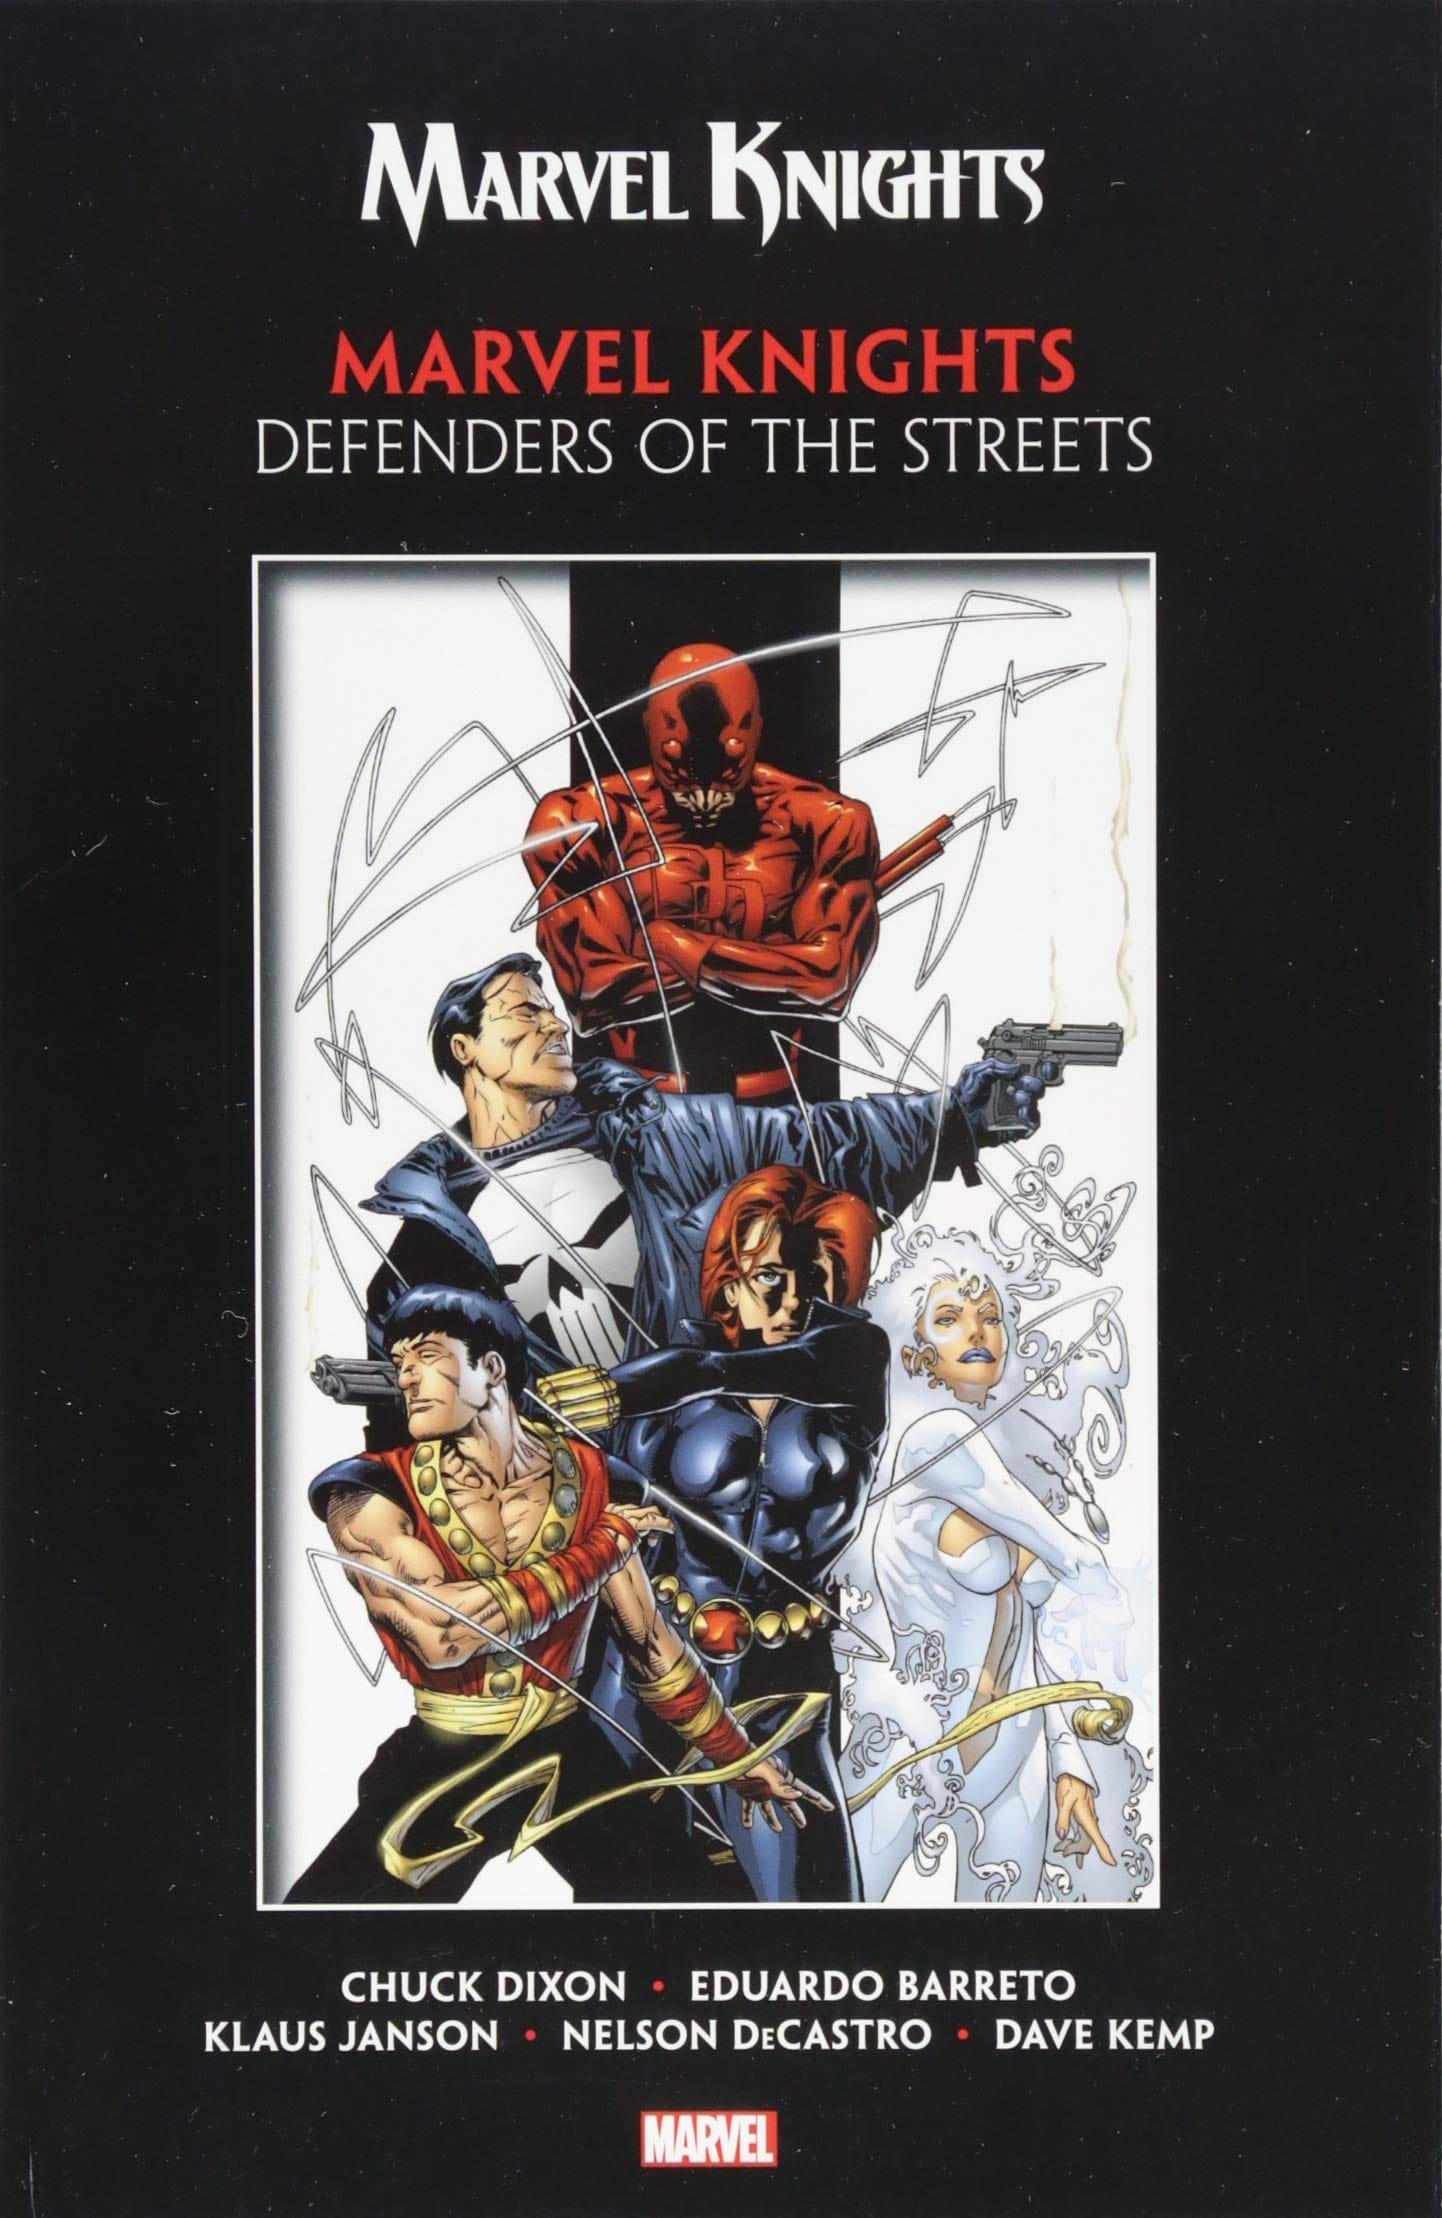 Marvel Knights by Dixon & Barreto Vol. 1: Defenders of the Streets - Third Eye